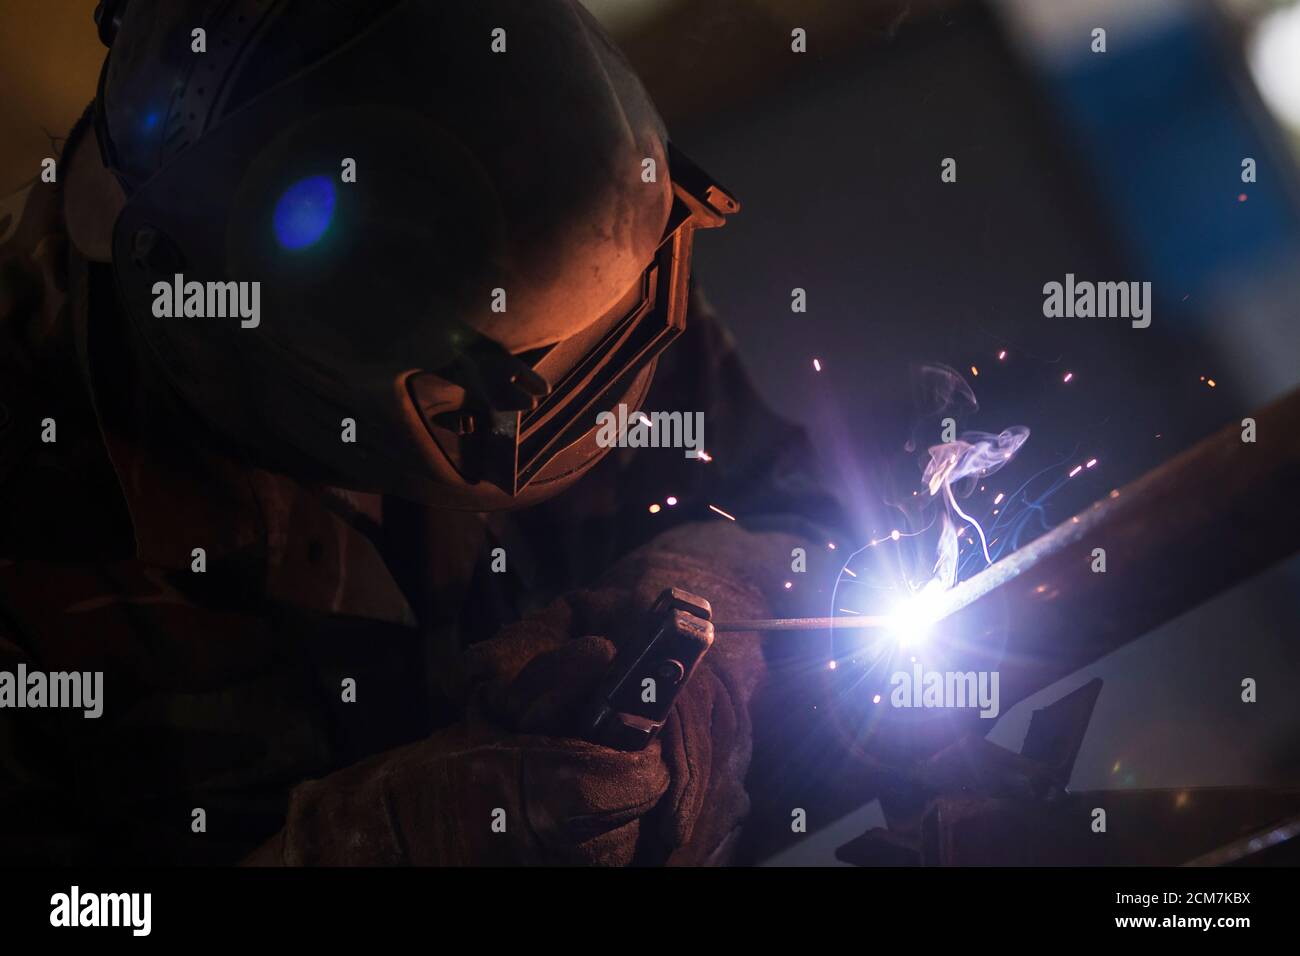 Welder at work. Man in a protective mask. The welder makes seams on the metal. Sparks and smoke when welding. Stock Photo